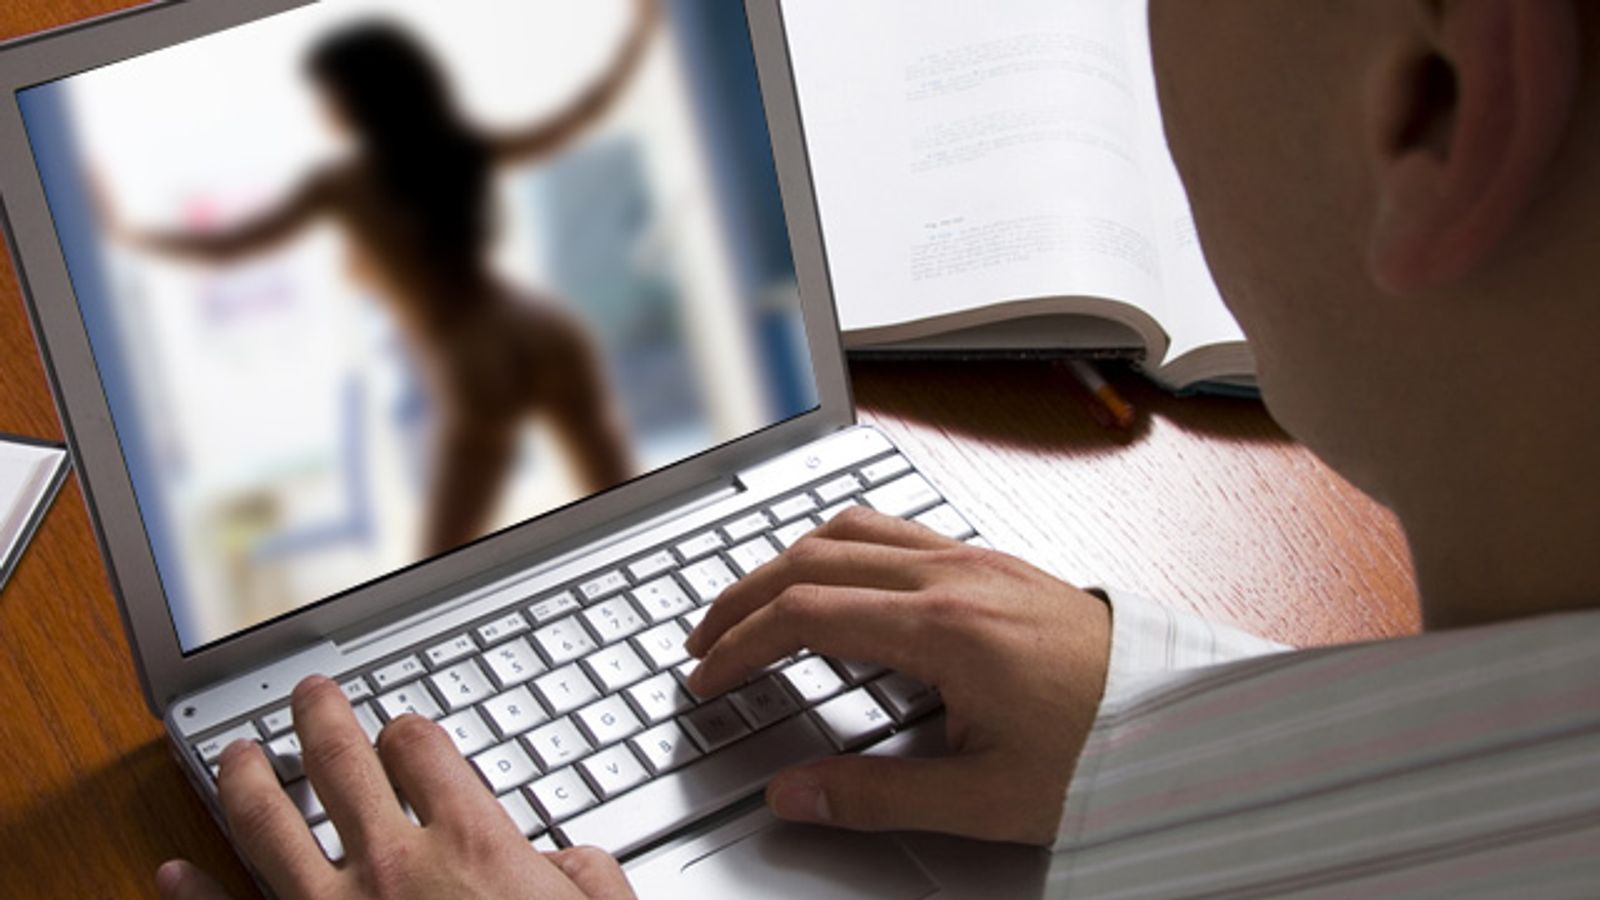 New Product Detects Porn Video Hidden on Computers